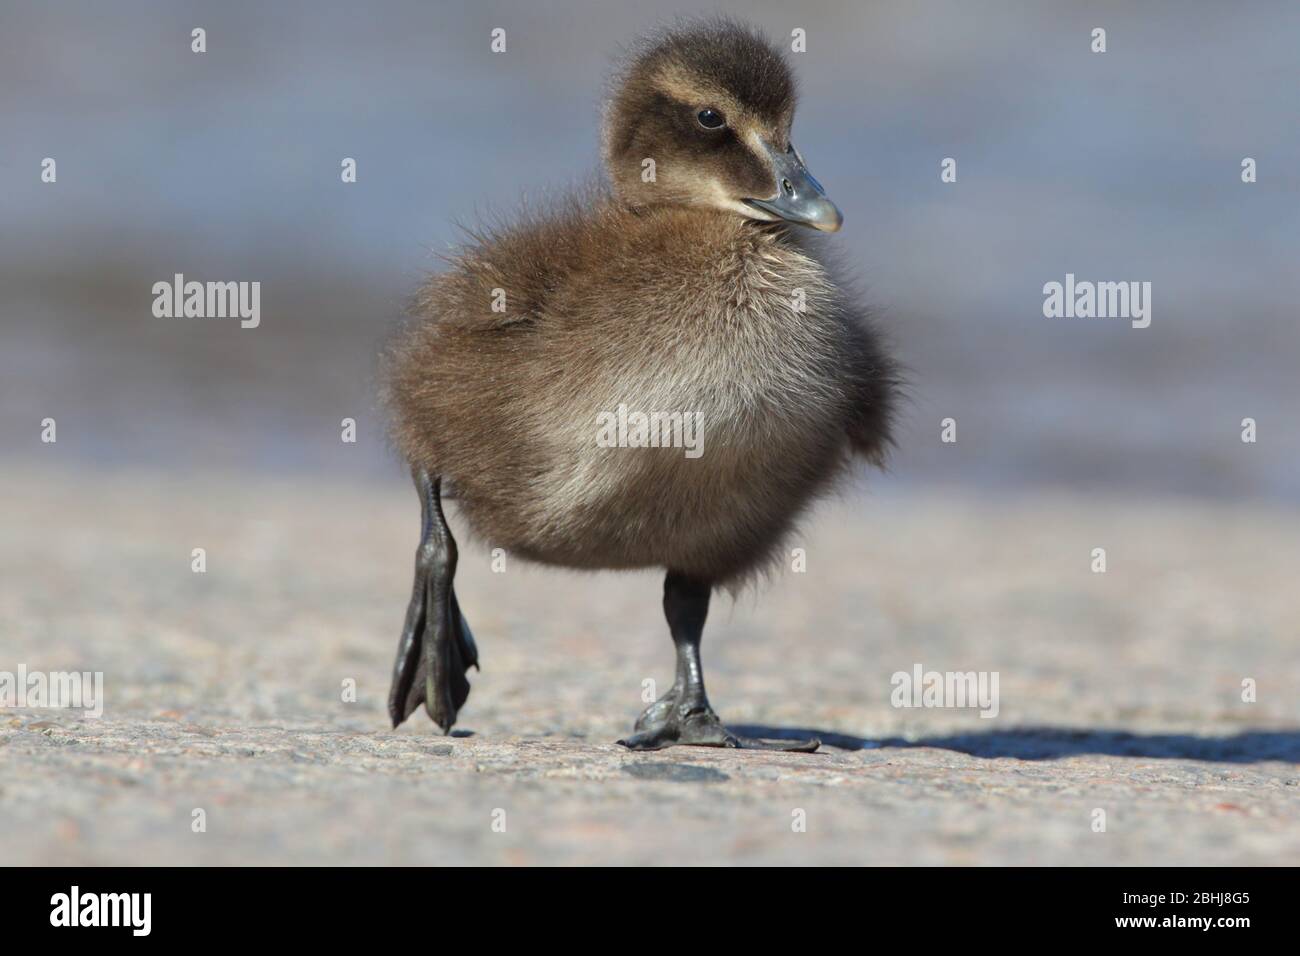 A Common Eider duckling (Somateria mollissima) in Northumberland, England in late spring/early summer Stock Photo